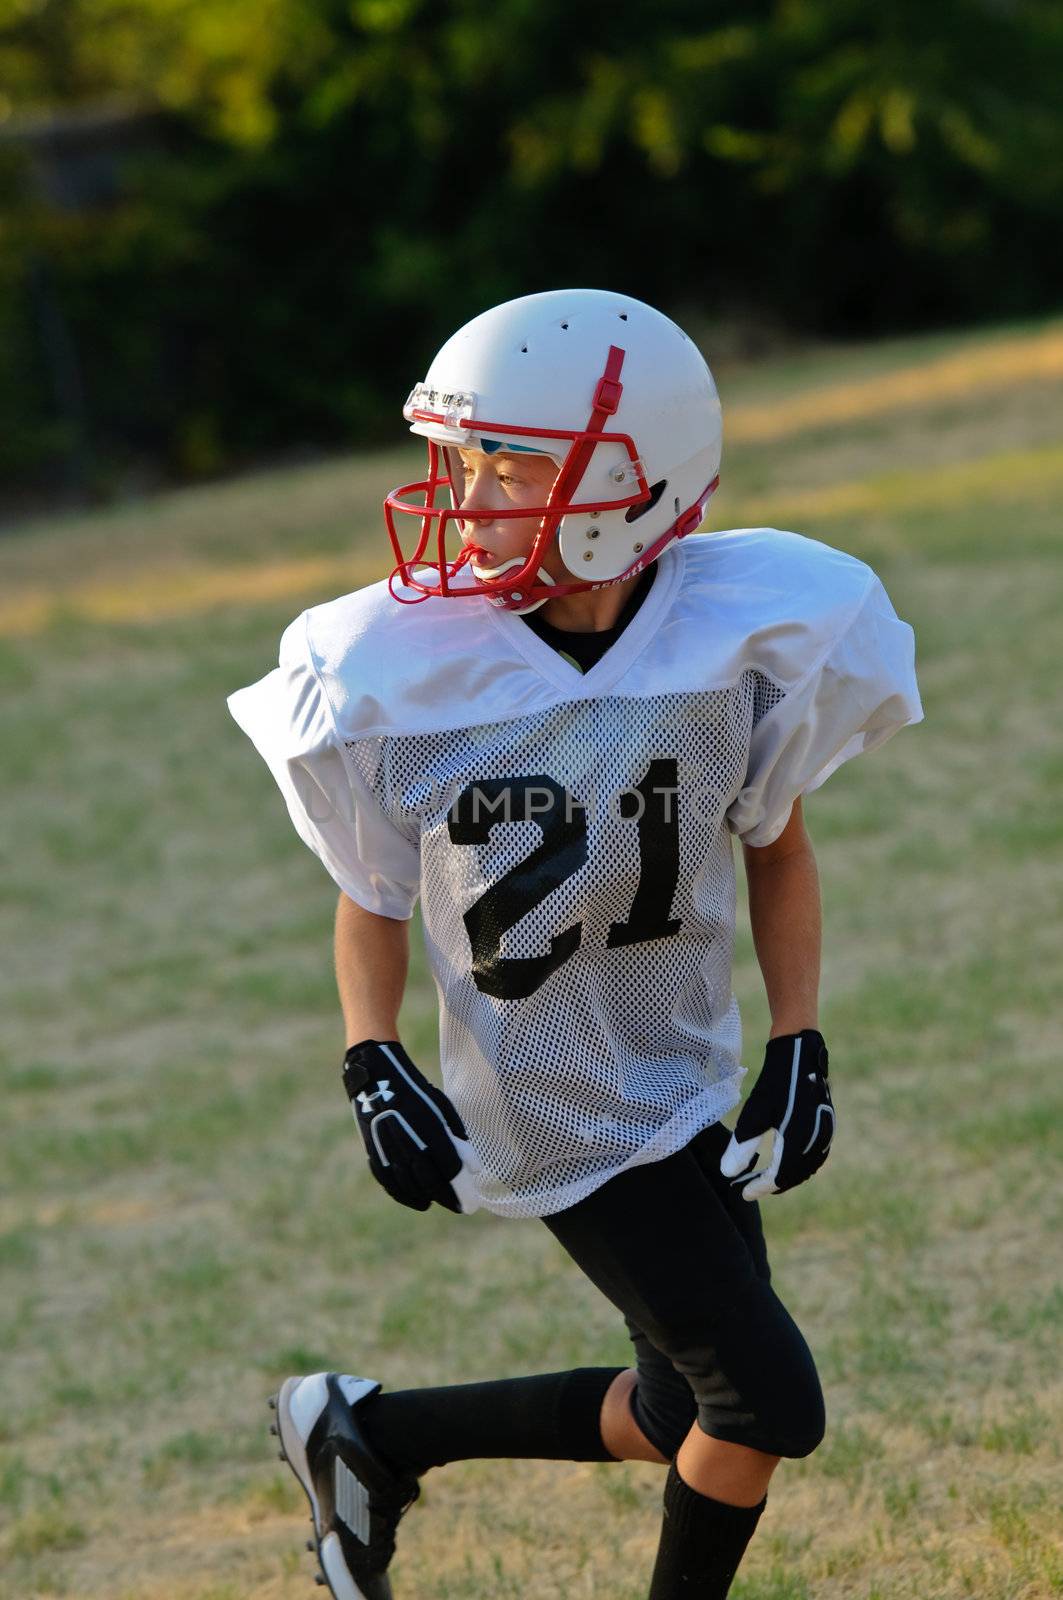 Young football player going out for a pass.